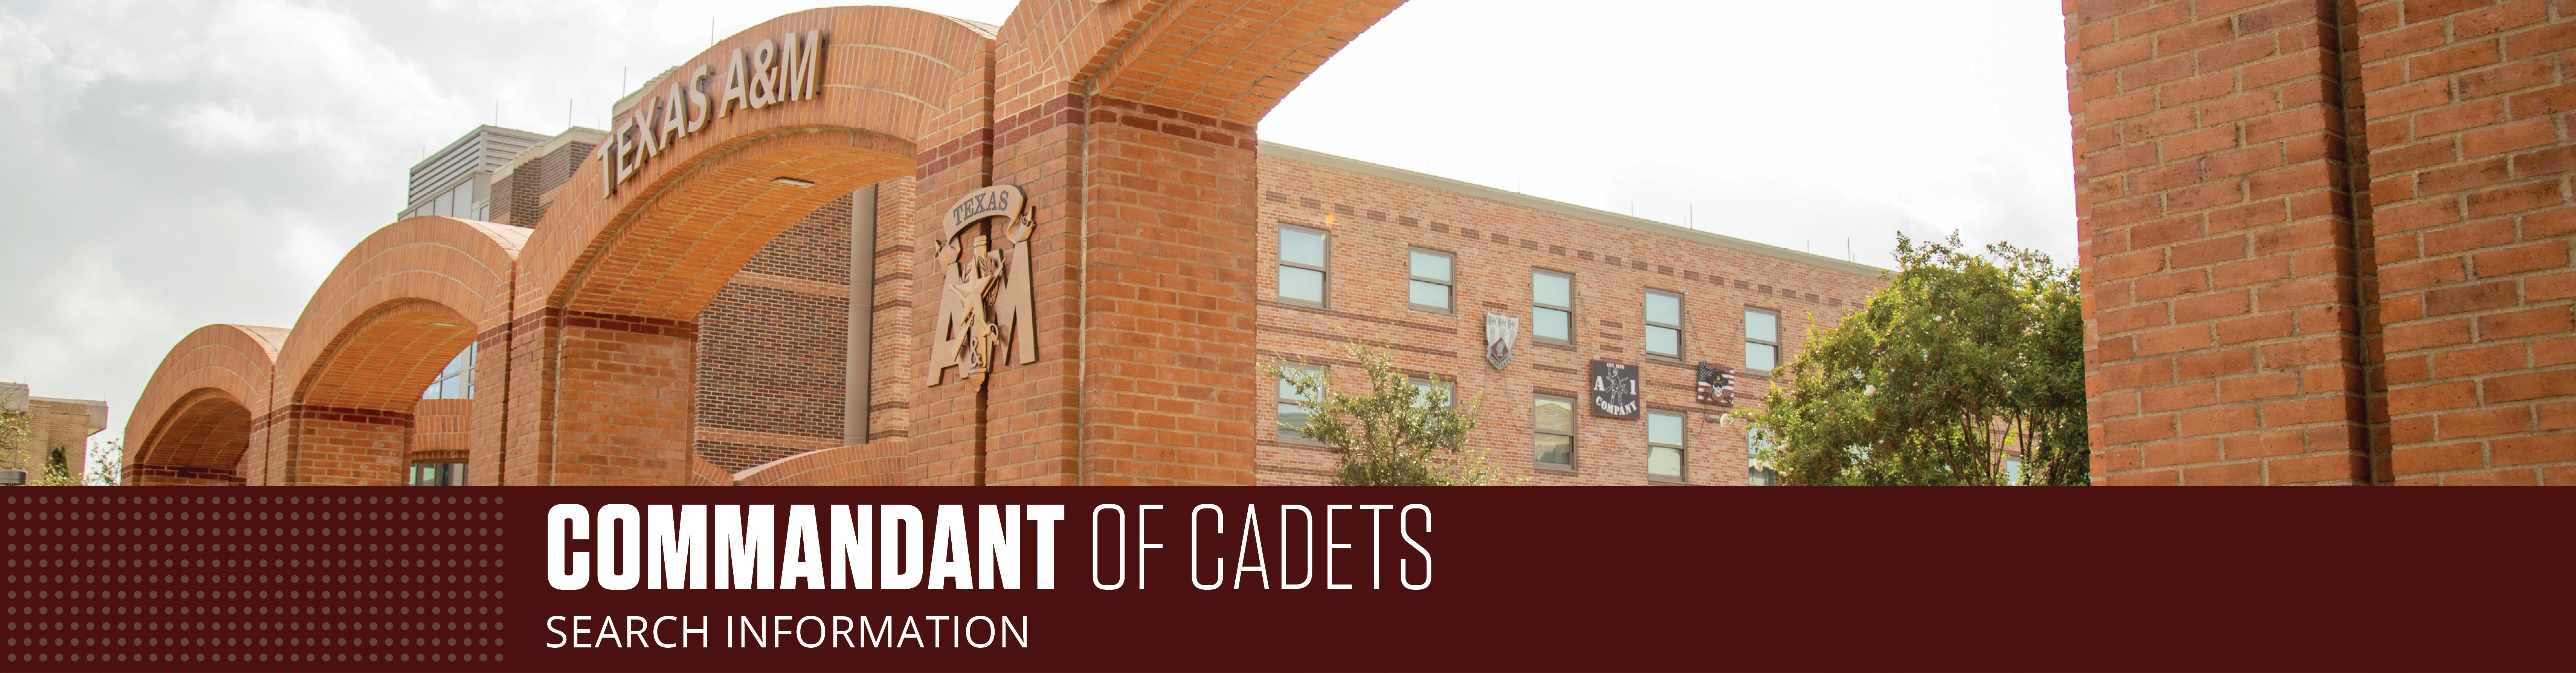 Commandant of Cadets Search Information